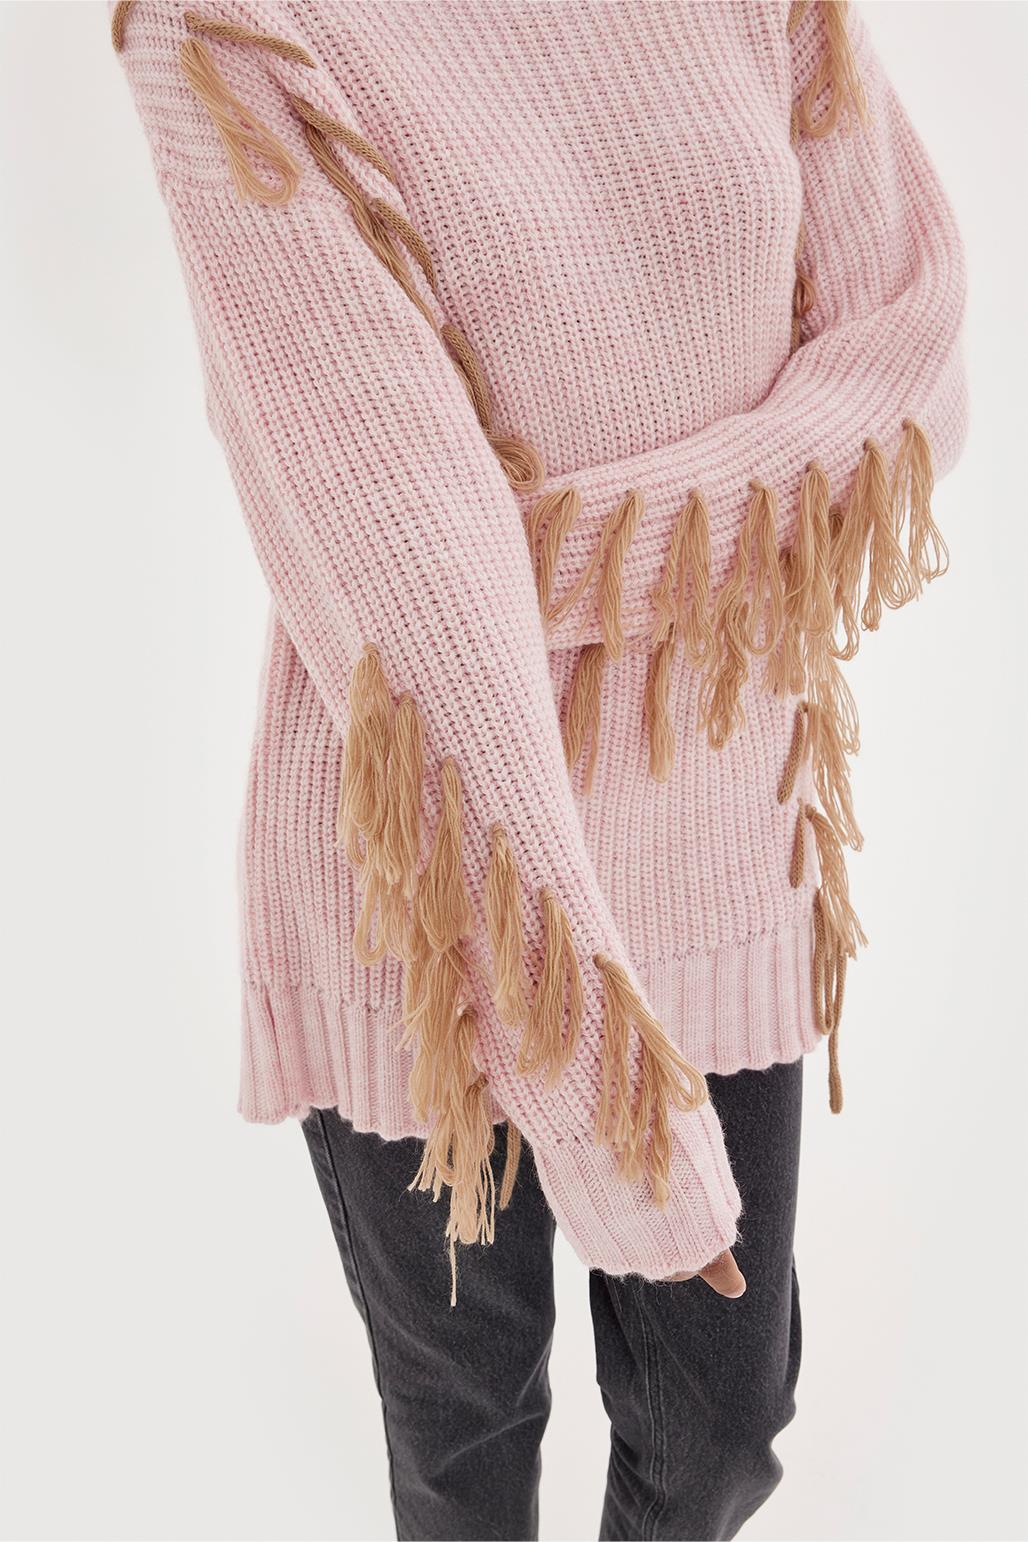 Knit Sweater With Tassels Pink